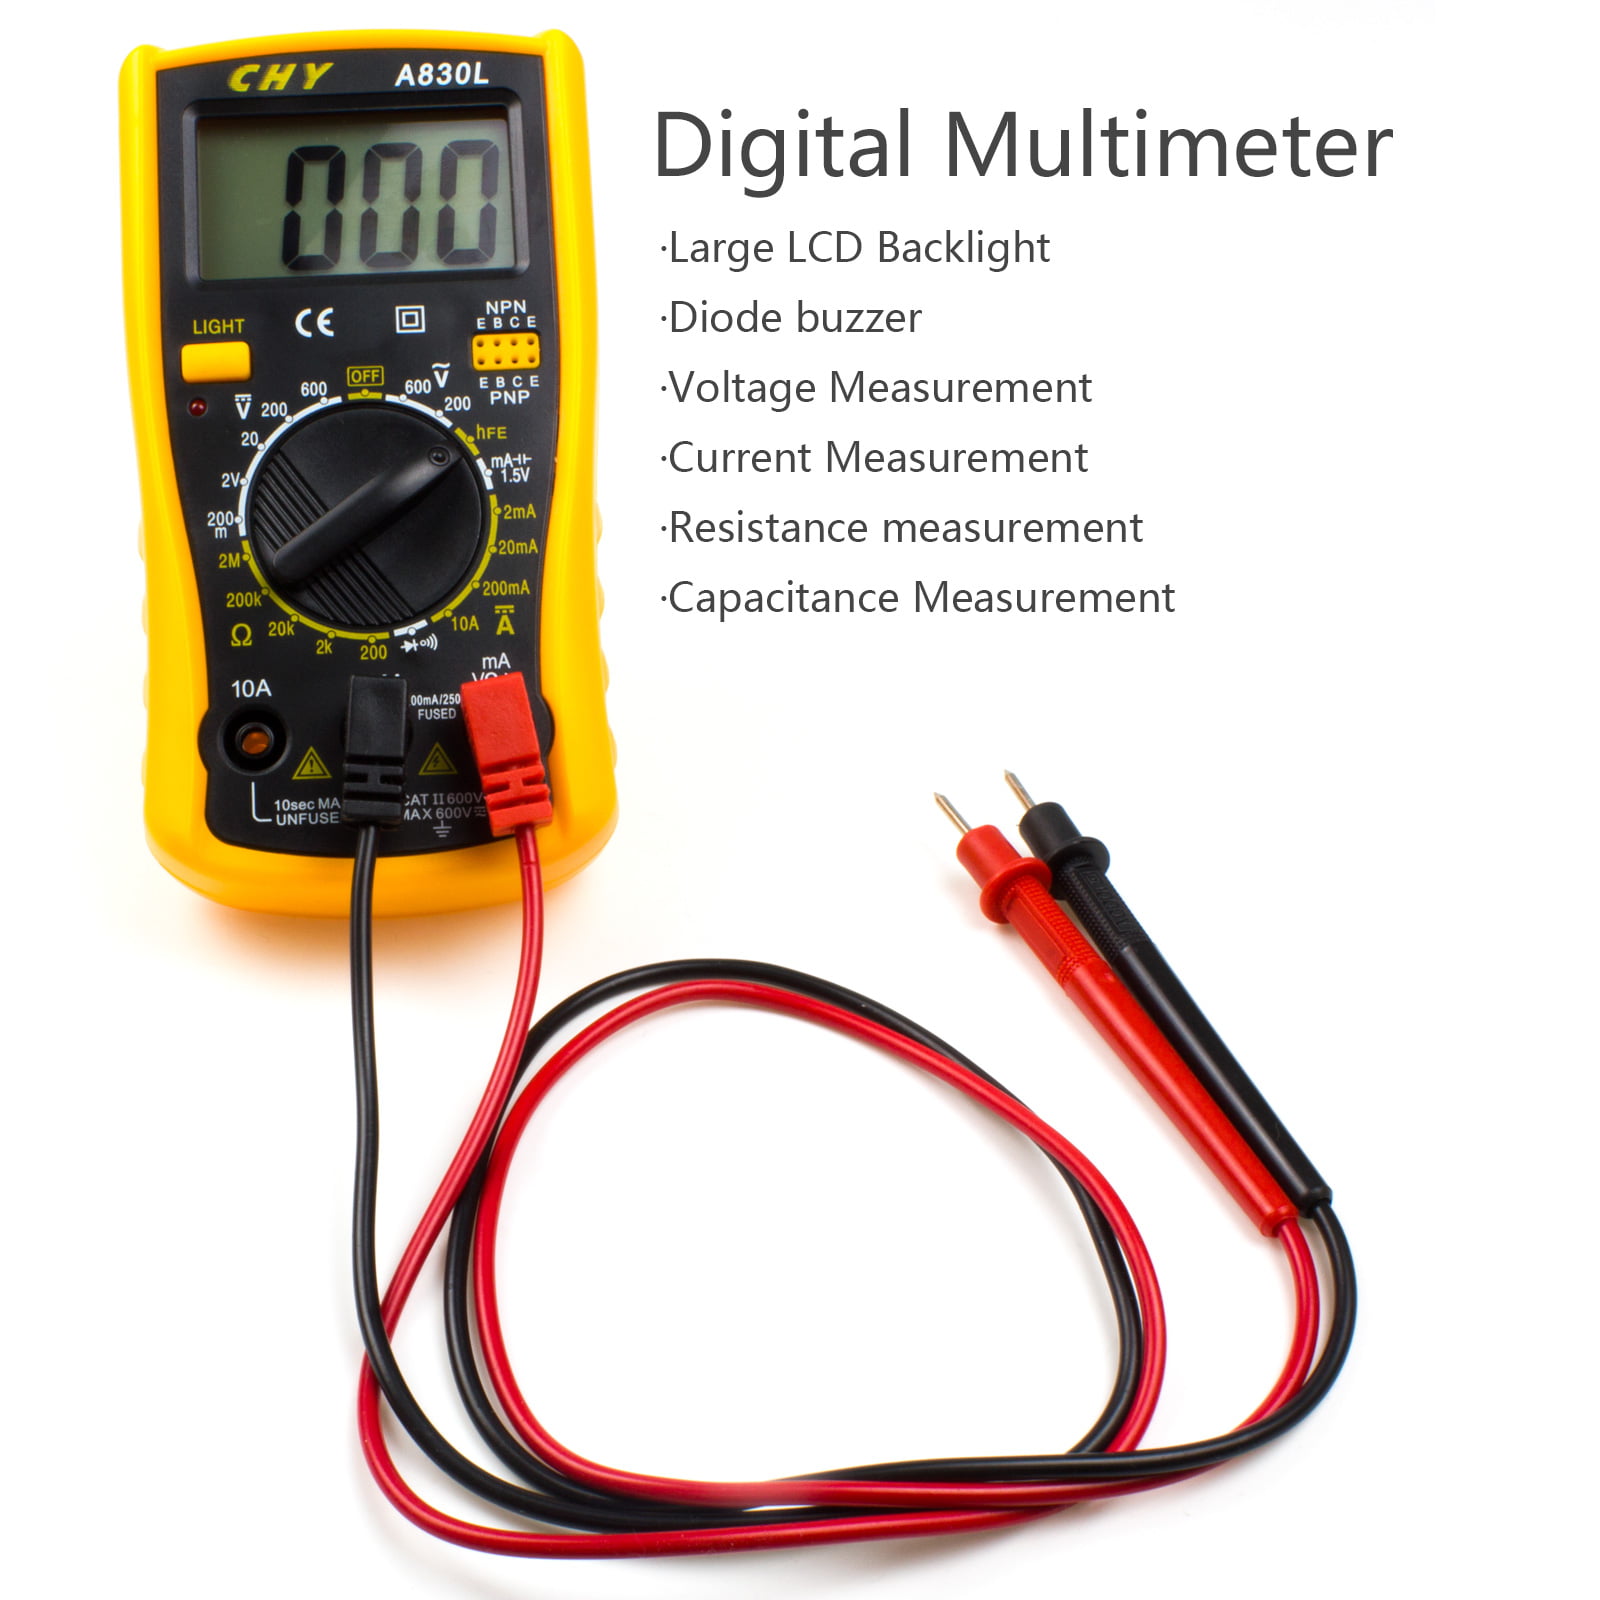 Soldering Iron Stand Digital Multimeter WRLSUN 60W Adjustable Temperature Electric Soldering Iron 110V with ON/OFF Switch Welding Tool Updated Soldering Iron Kit 